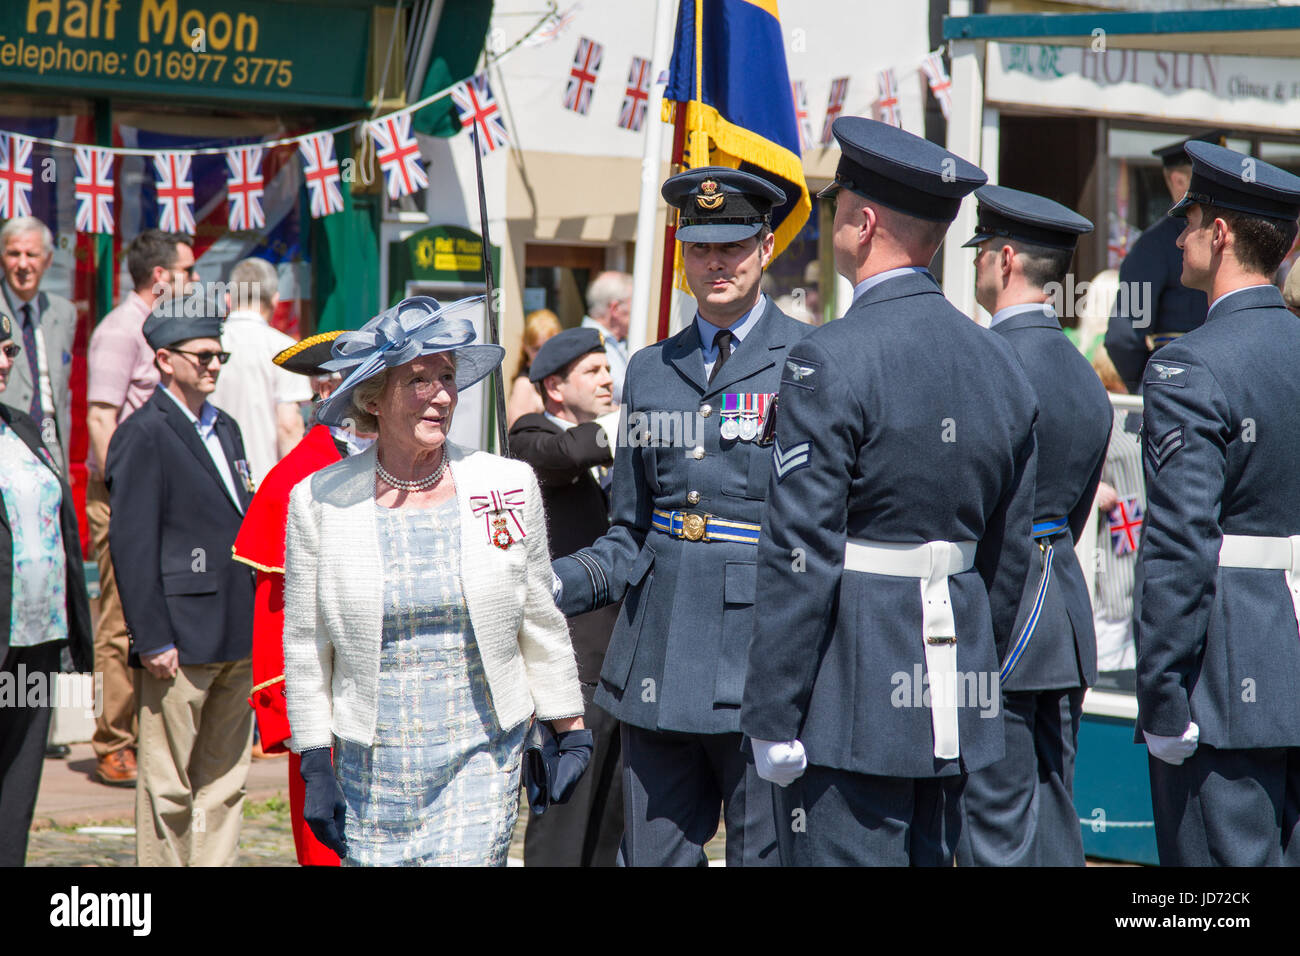 Brampton, UK. 18th June, 2017. RAF Spadeadam received the Freedom of Brampton on Jun 18 2017. The Lord Lieutenant of Cumbria, Claire Hensman and Station Commander Wing Commander Ruari Henderson-Begg, inspect the troops at the ceremony Credit: Andrew Cheal/Alamy Live News Stock Photo